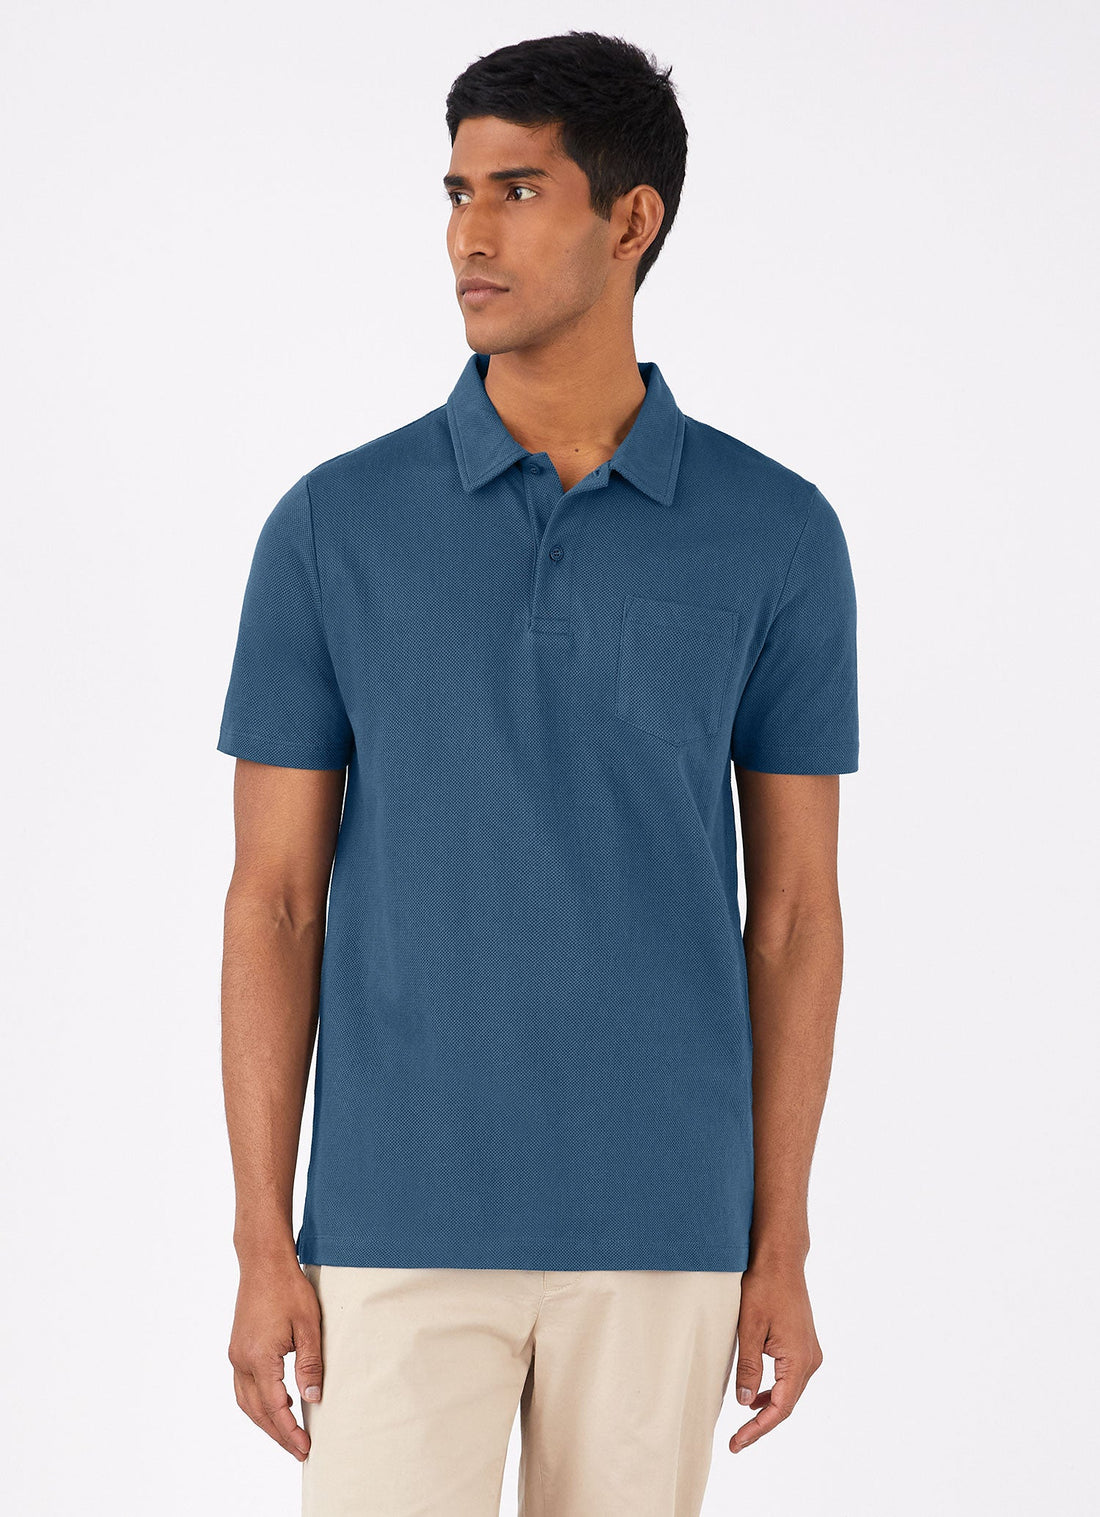 Men's Riviera Polo Shirt in Teal